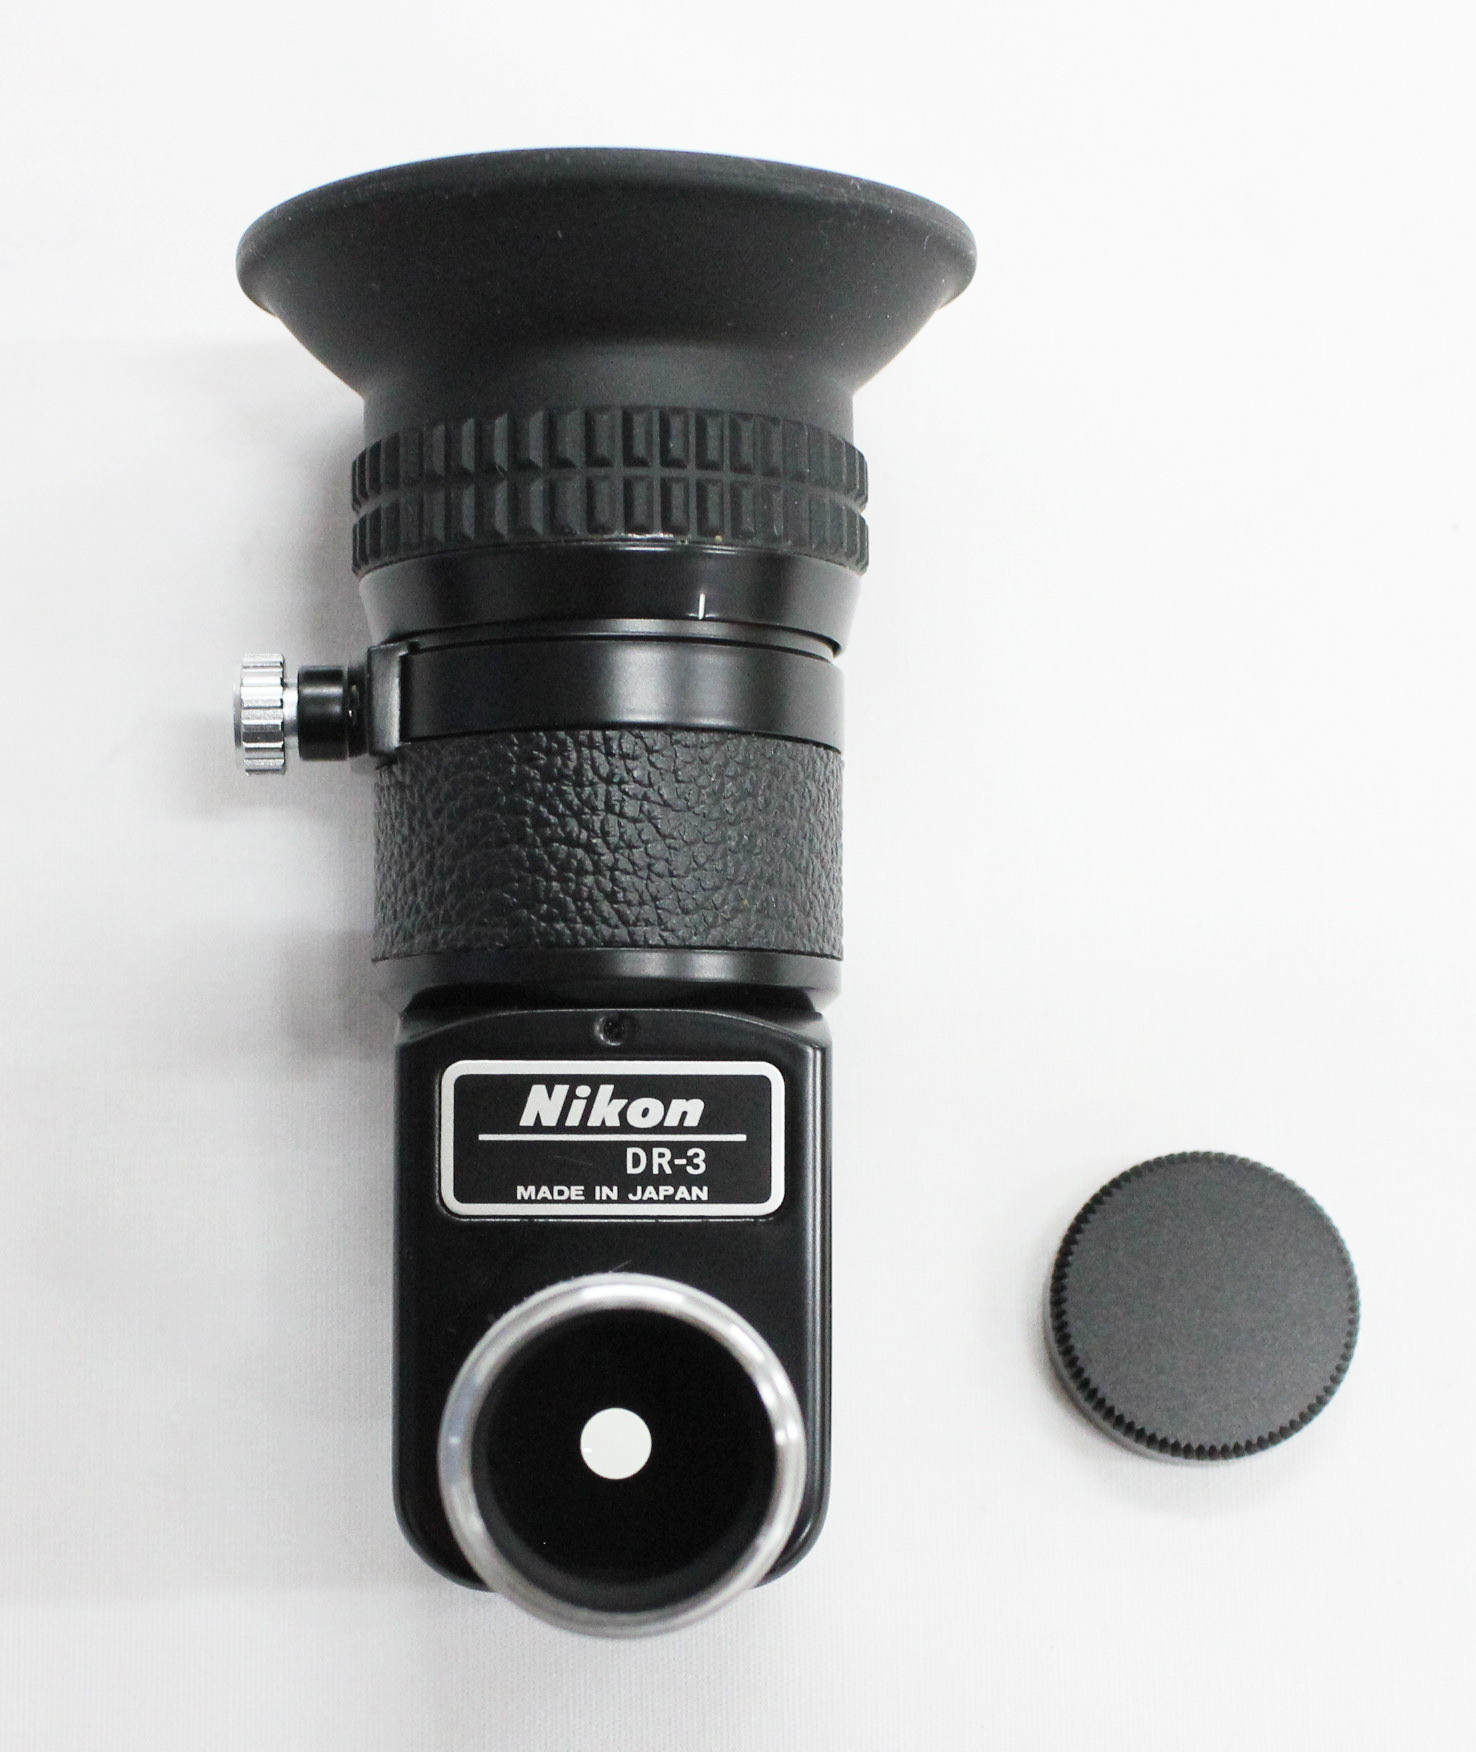 [N.Mint] Nikon DR-3 Right Angle Viewfinder from Japan